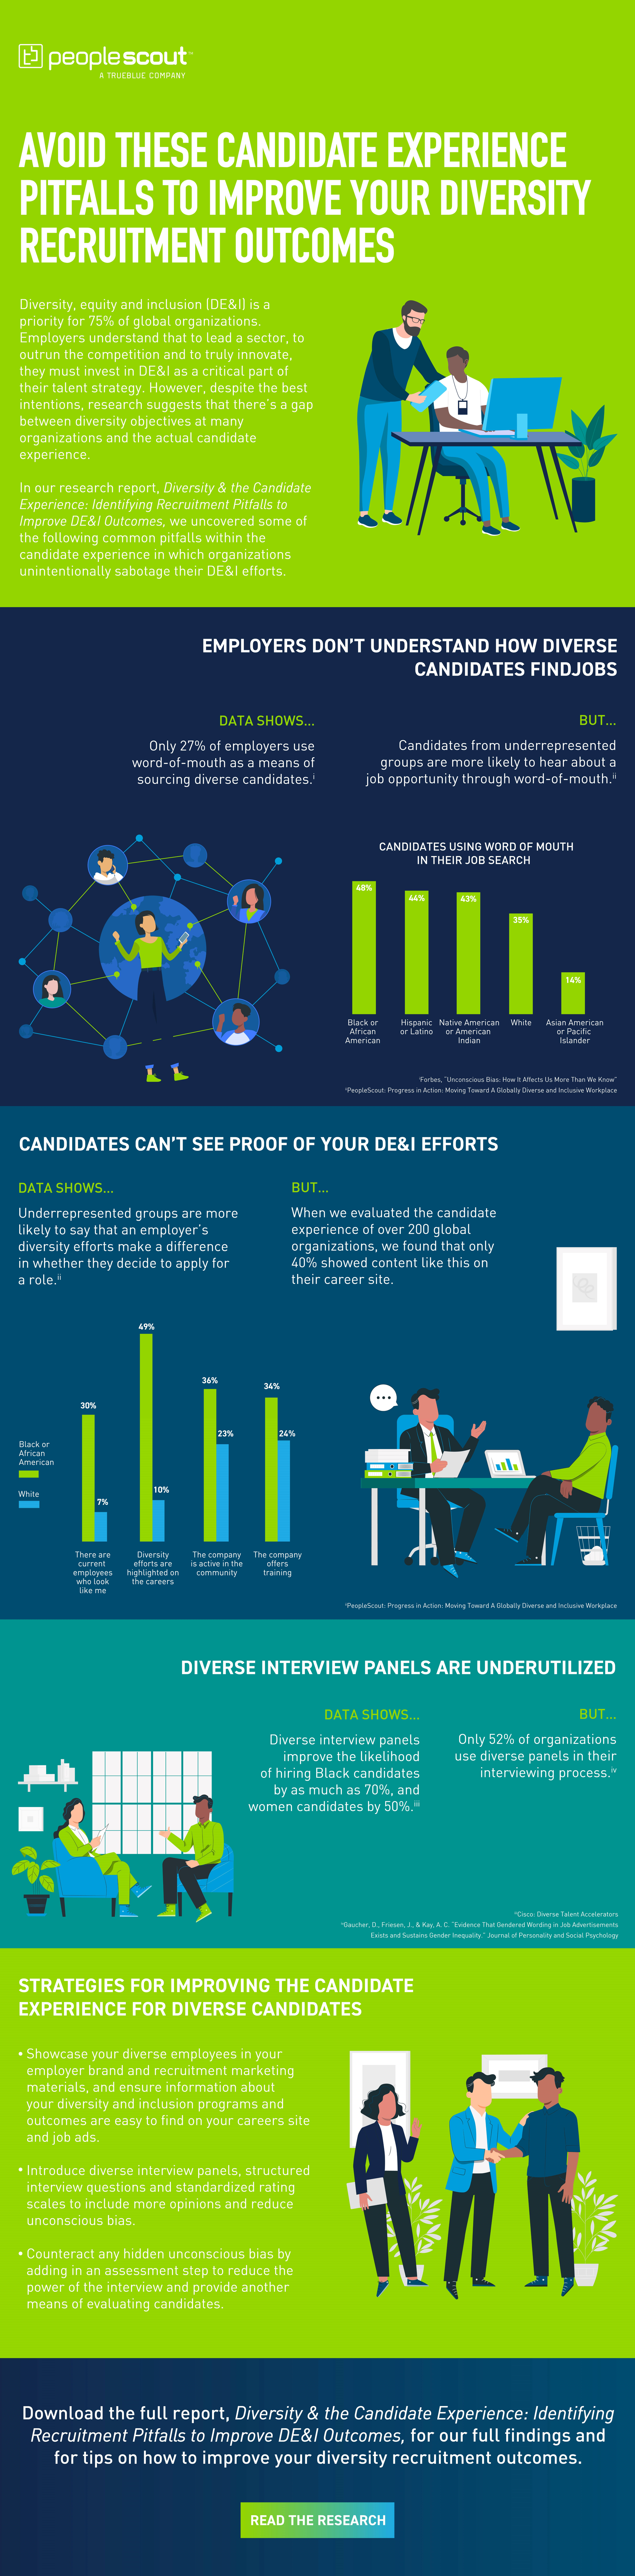 Diversity and candidate experience infographic